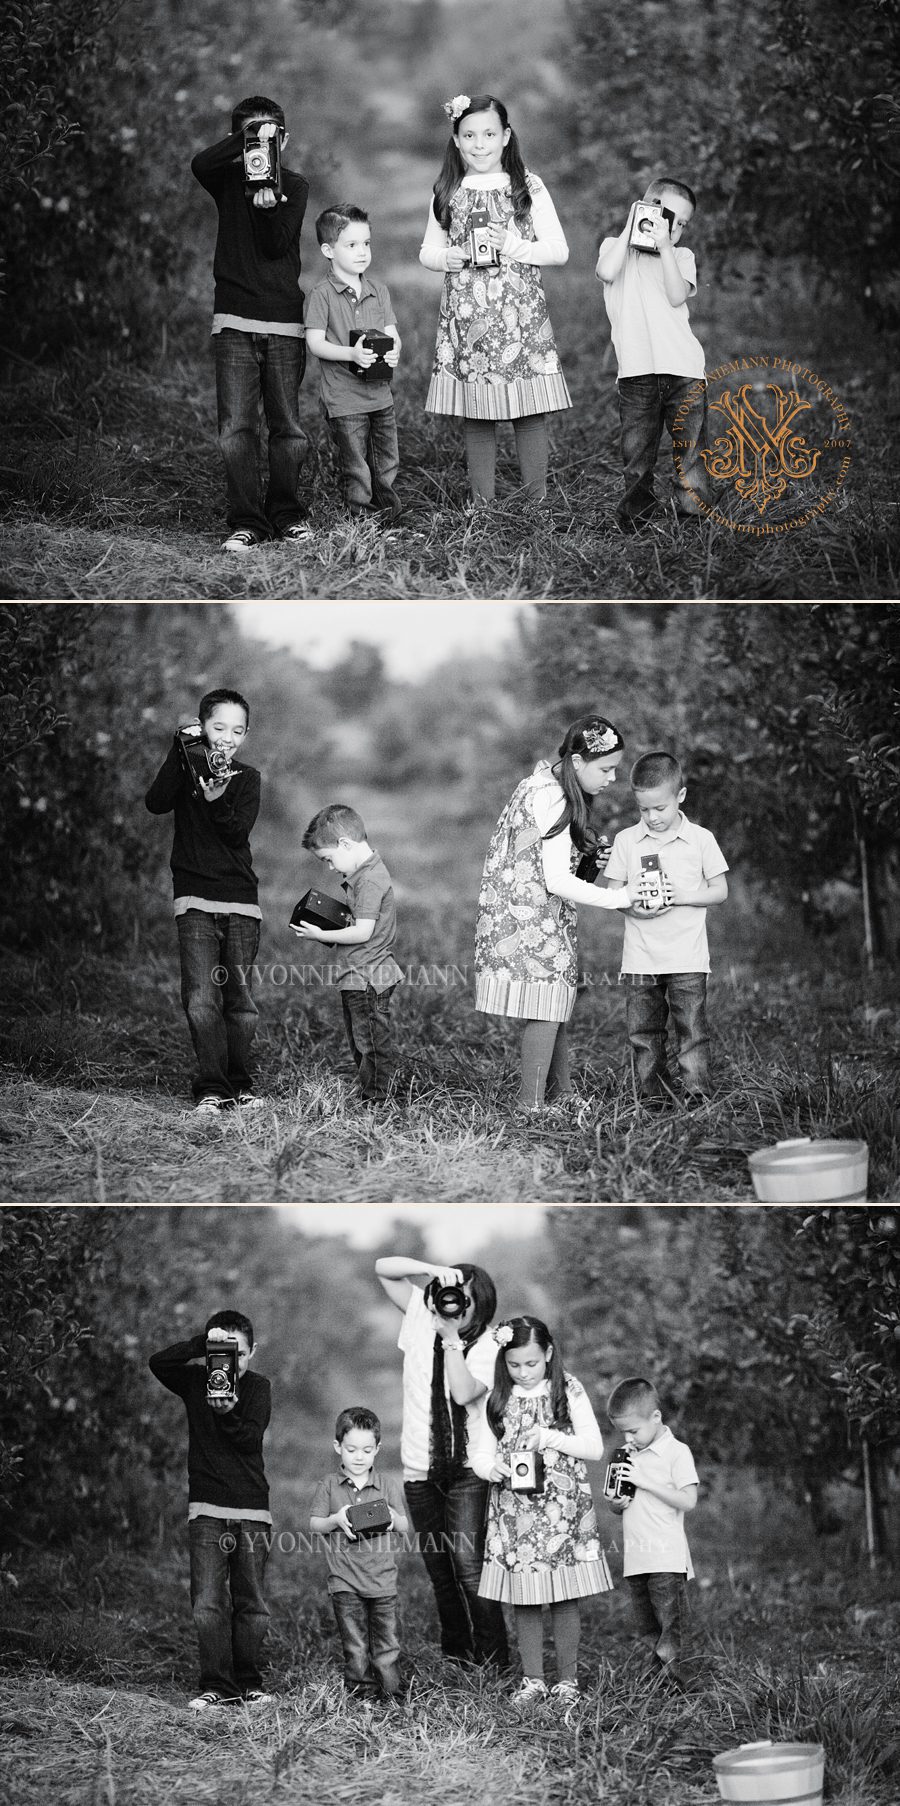 Yvonne Niemann Photography takes pictures of children playing with vintage cameras